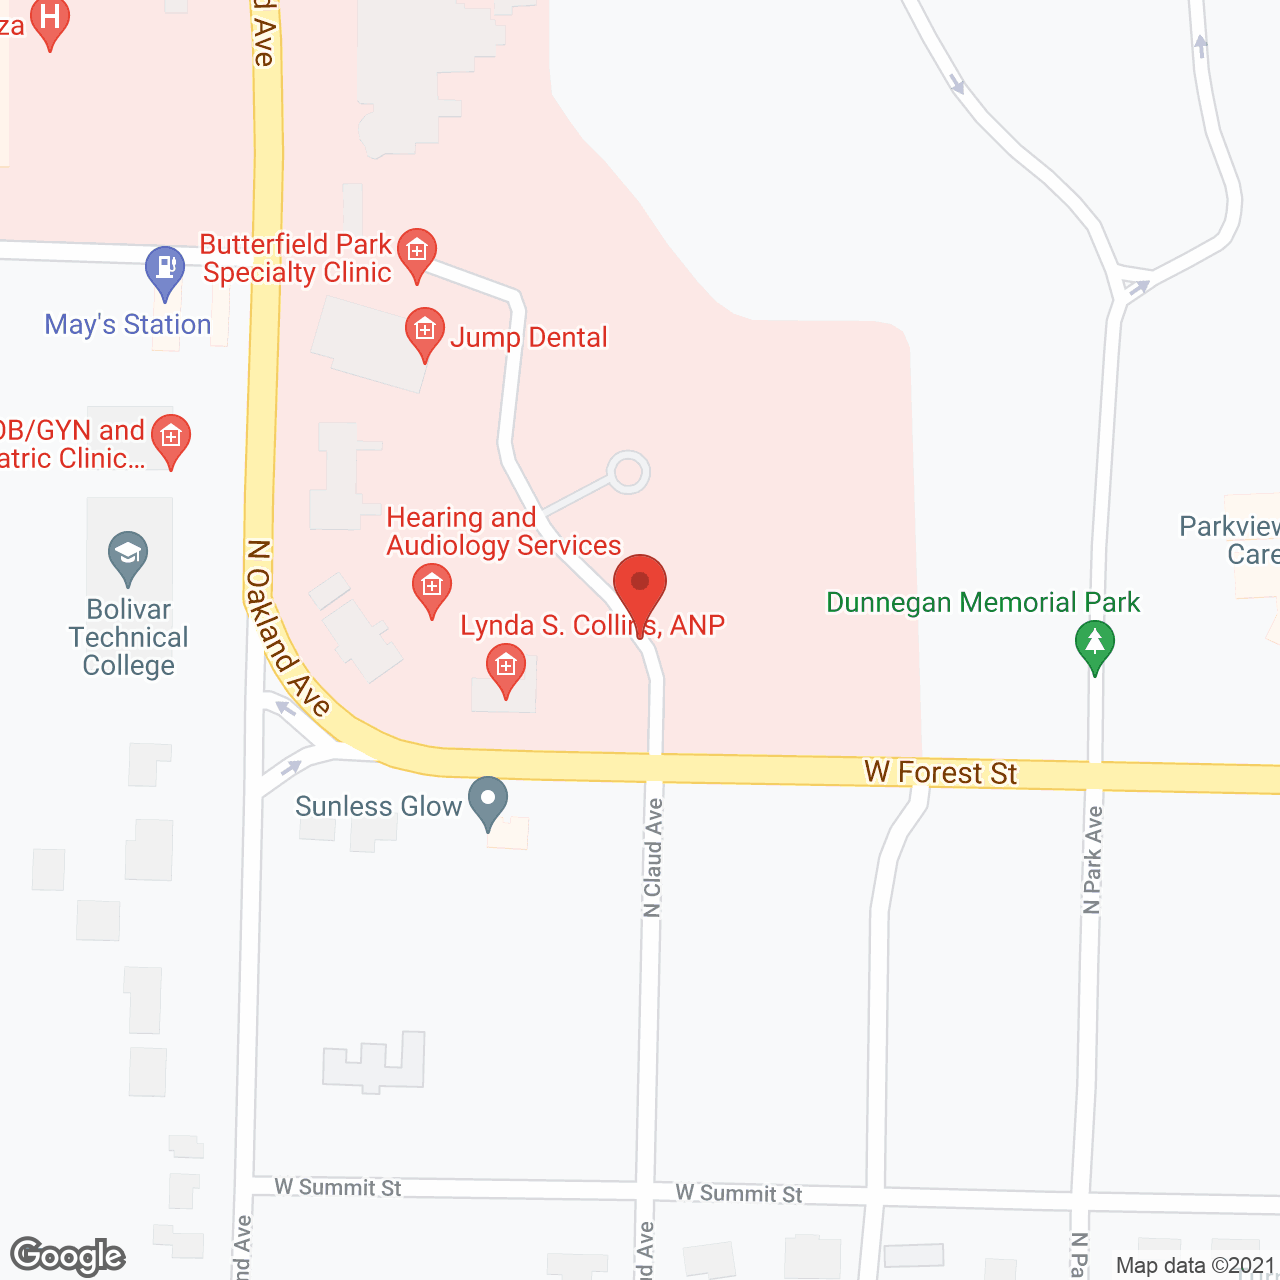 Butterfield Residential Care Center in google map